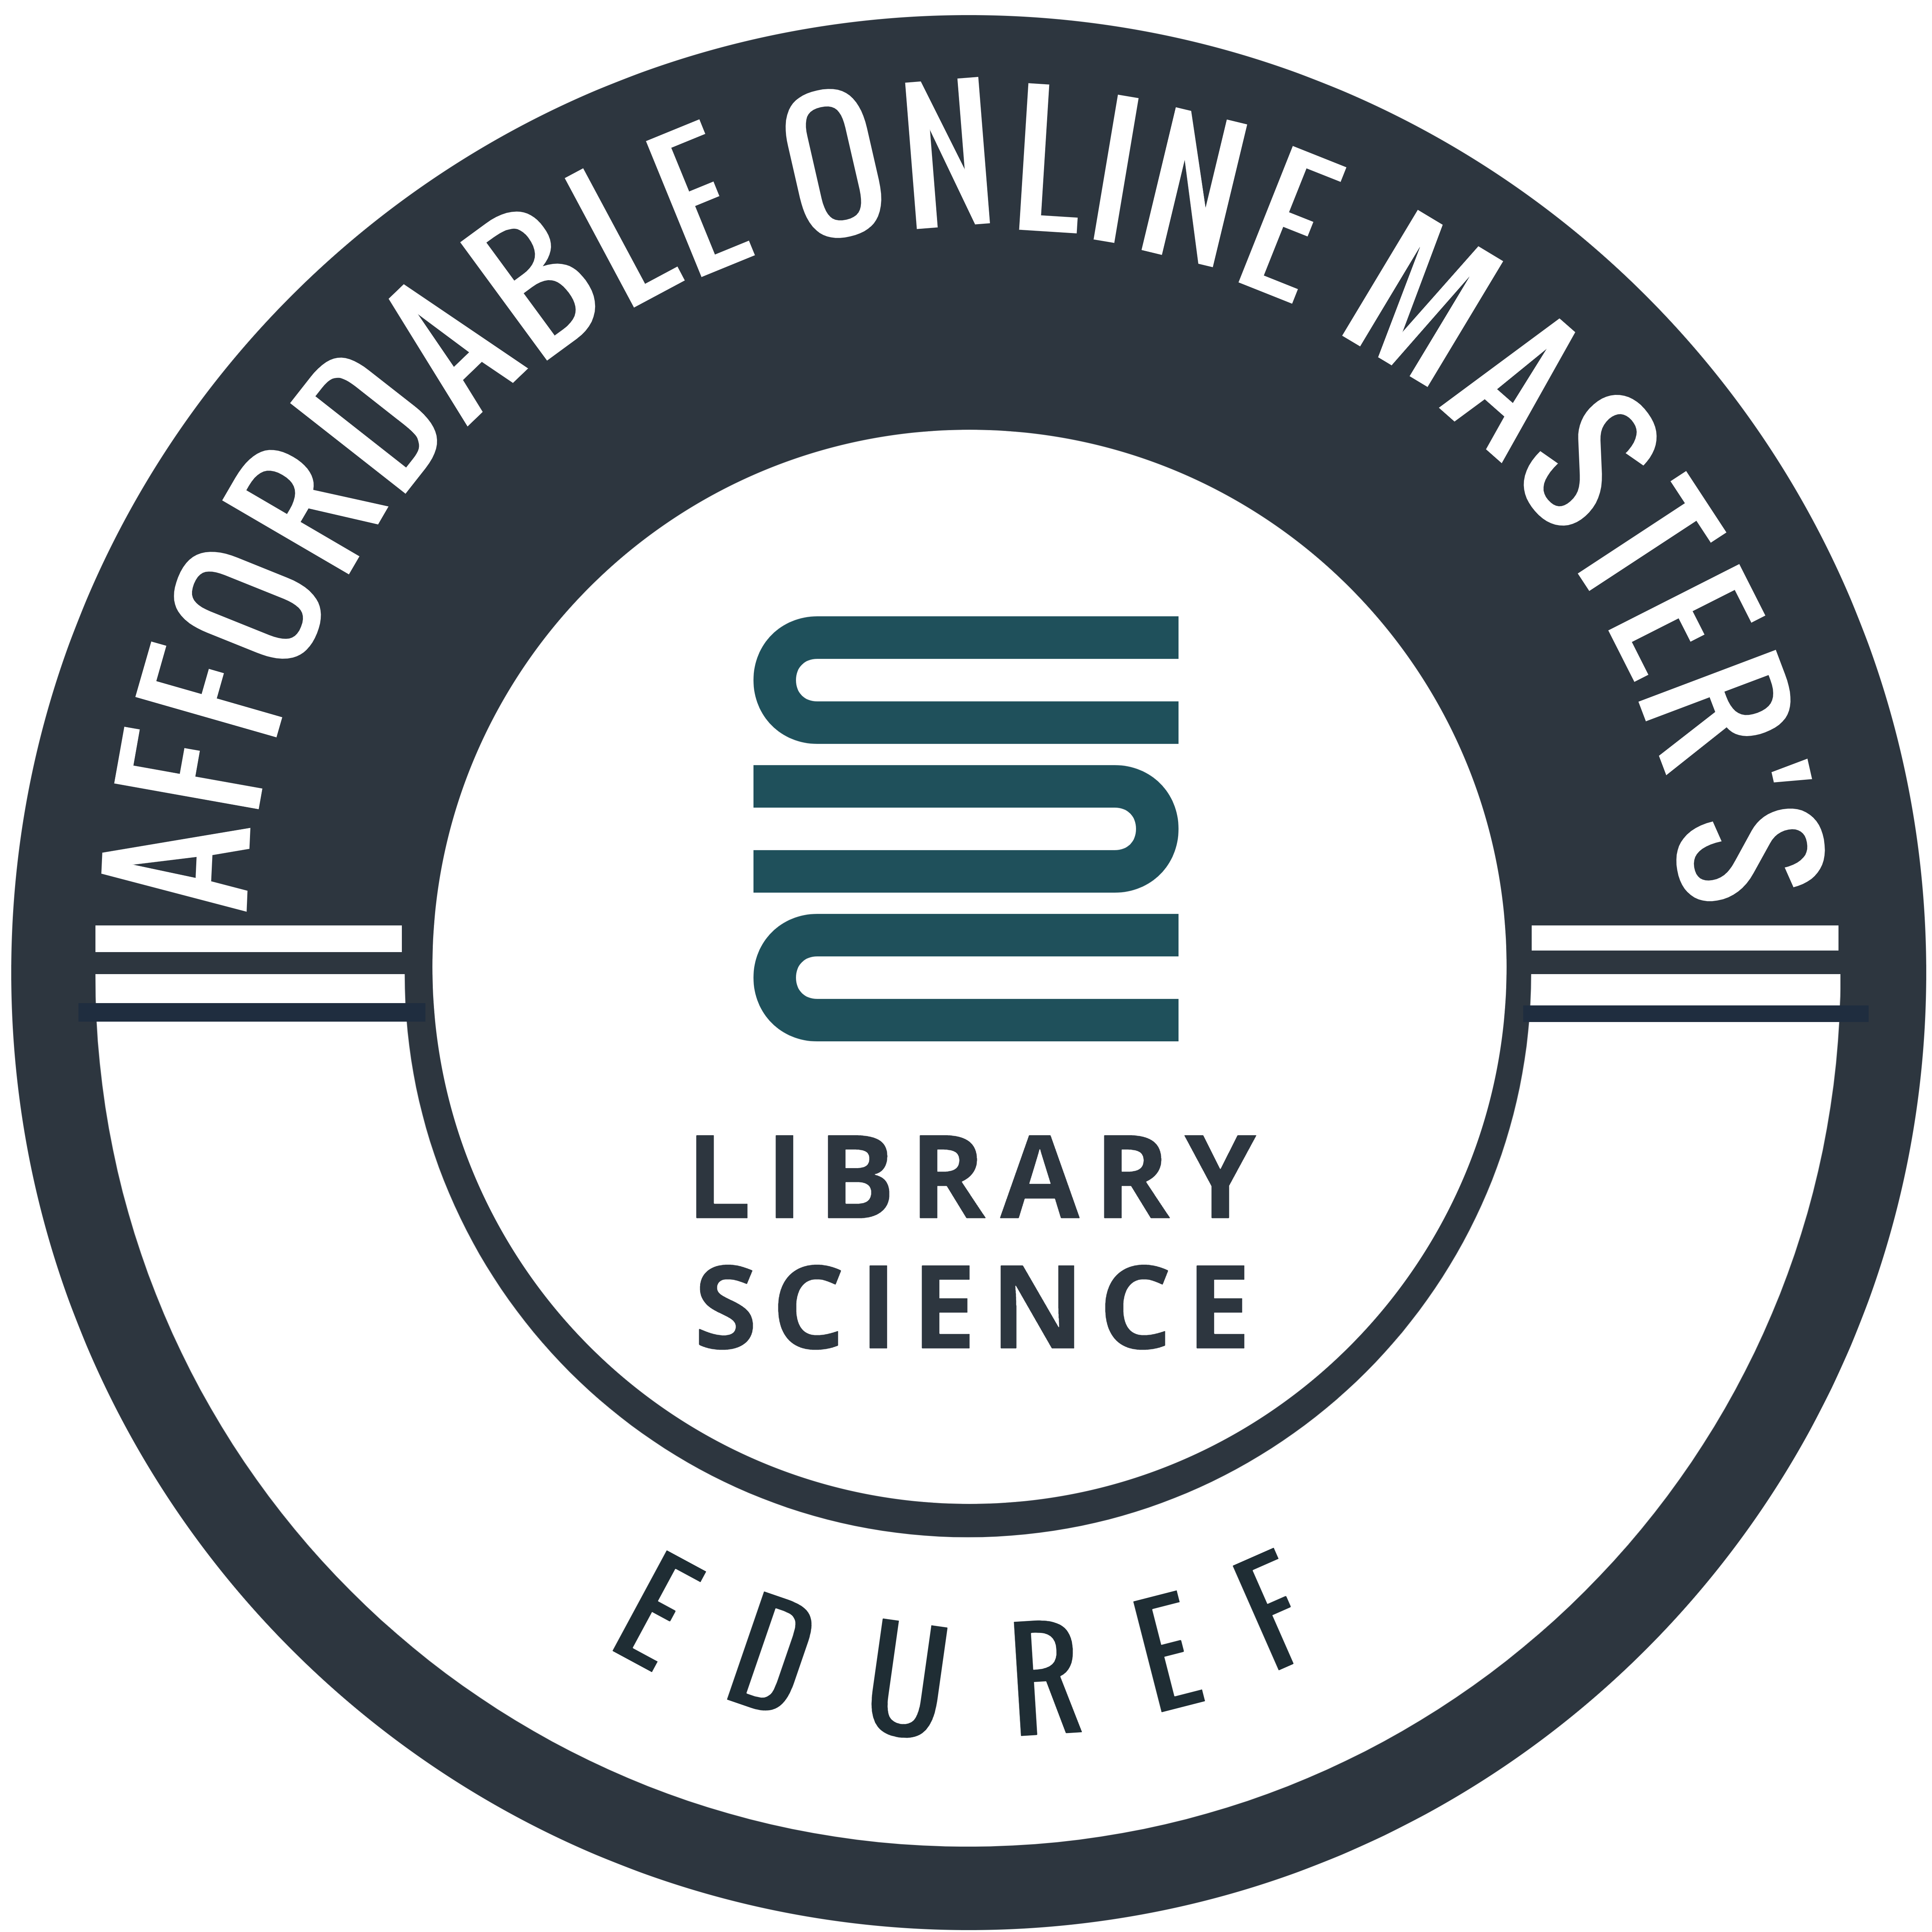 EduRef.net presents the most affordable Online Master’s degree programs in Library Science